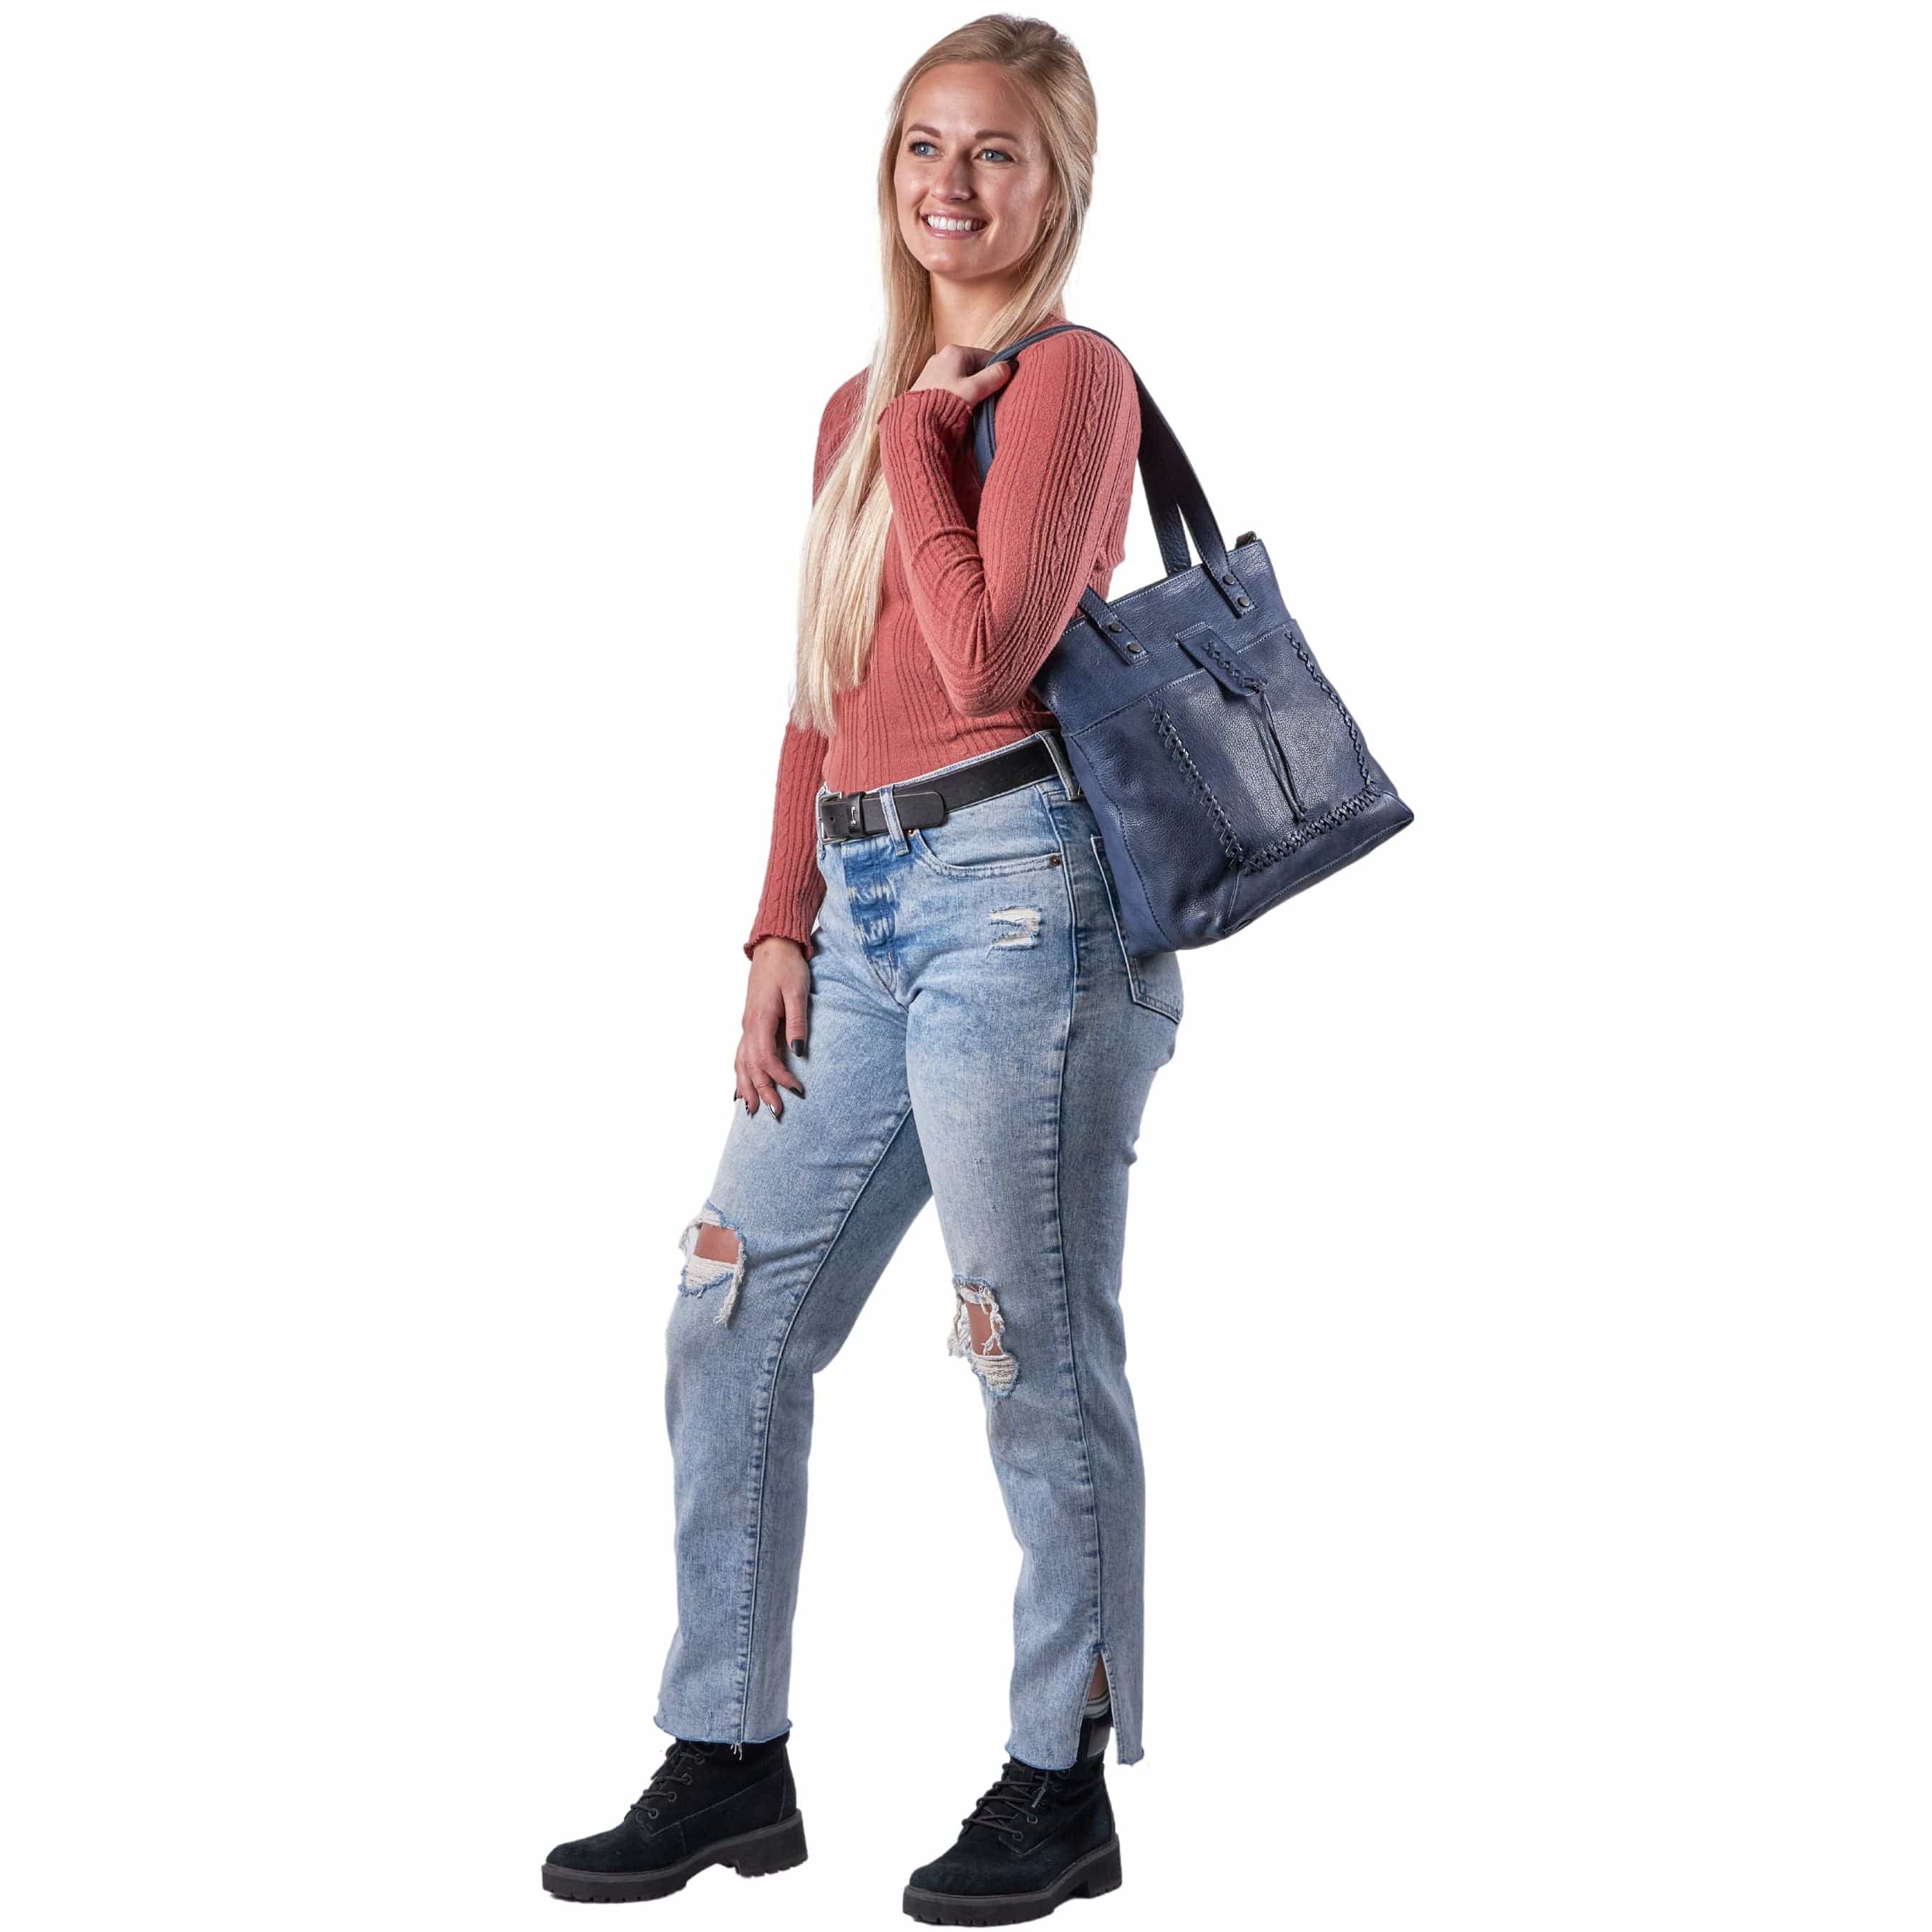 Concealed Carry Eden Tote with Universal Holster for Gun -  Women conceal carry purse for pistol -  Designer Luxury Conceal Carry Handbag -  YKK Locking Zippers and Universal Holster - Comfortable Concealed Carry - crossbody bags for everyday use - most popular crossbody bag